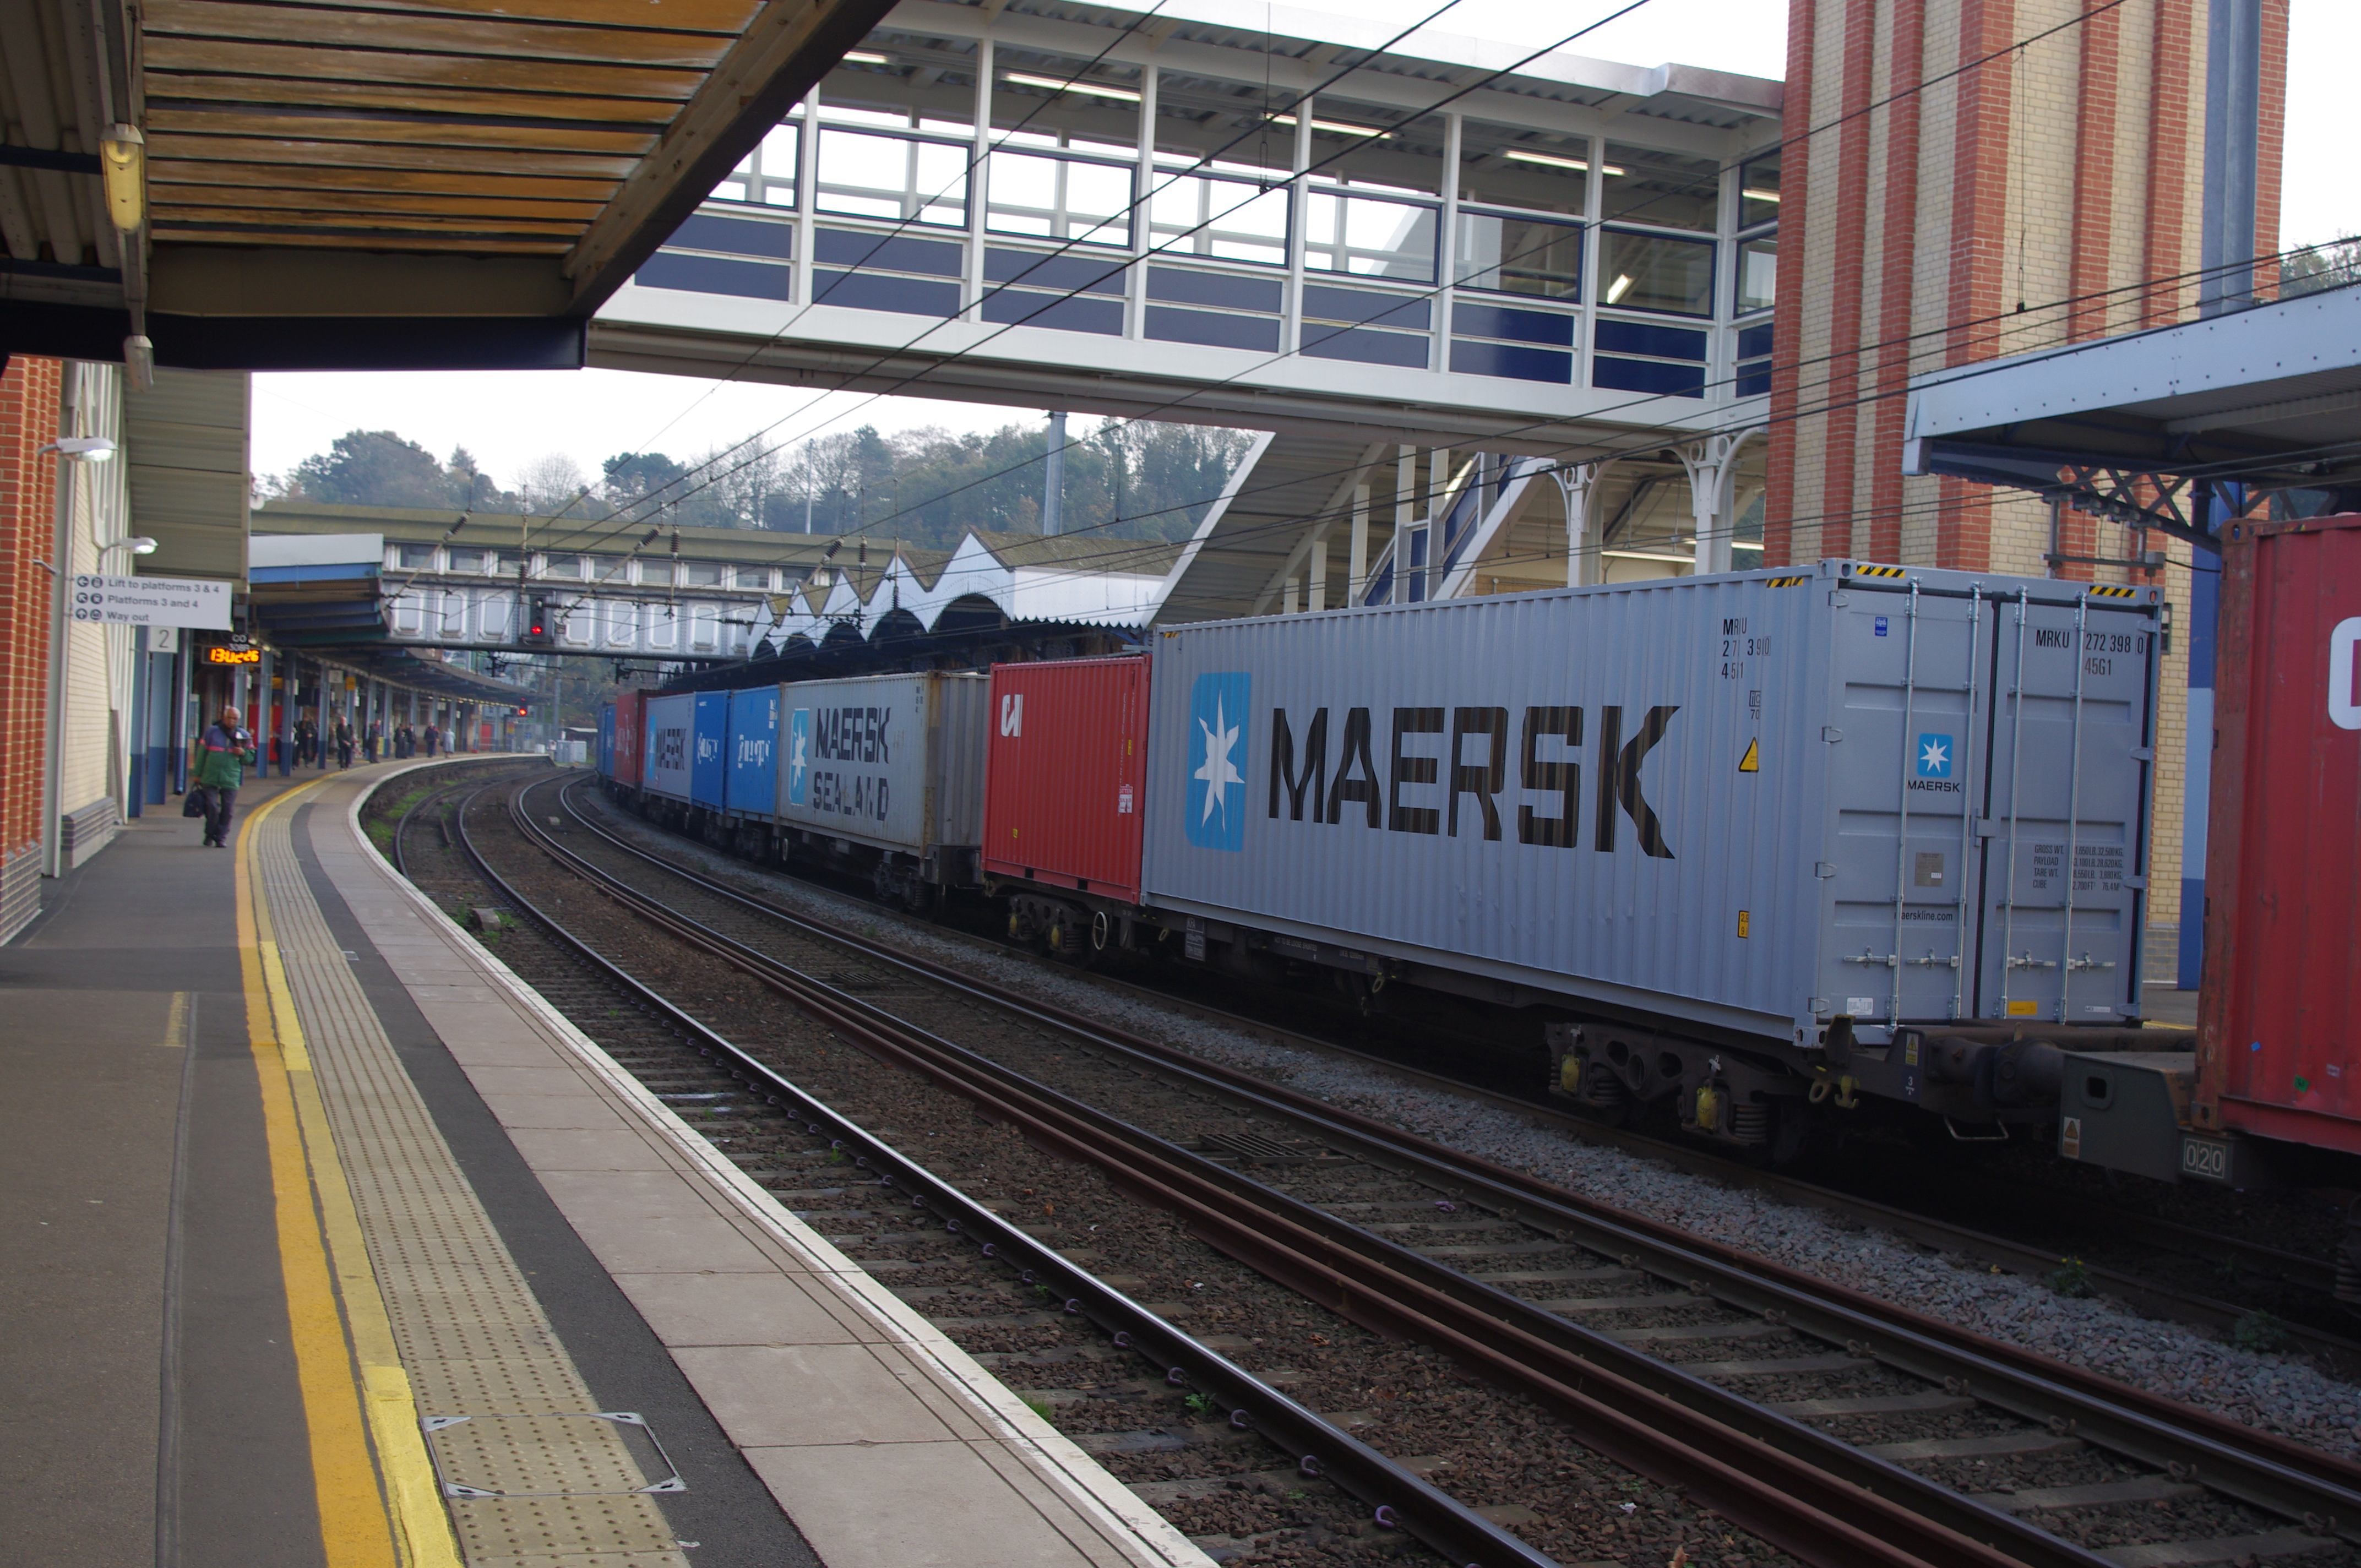 Maersk Container at Ipswich